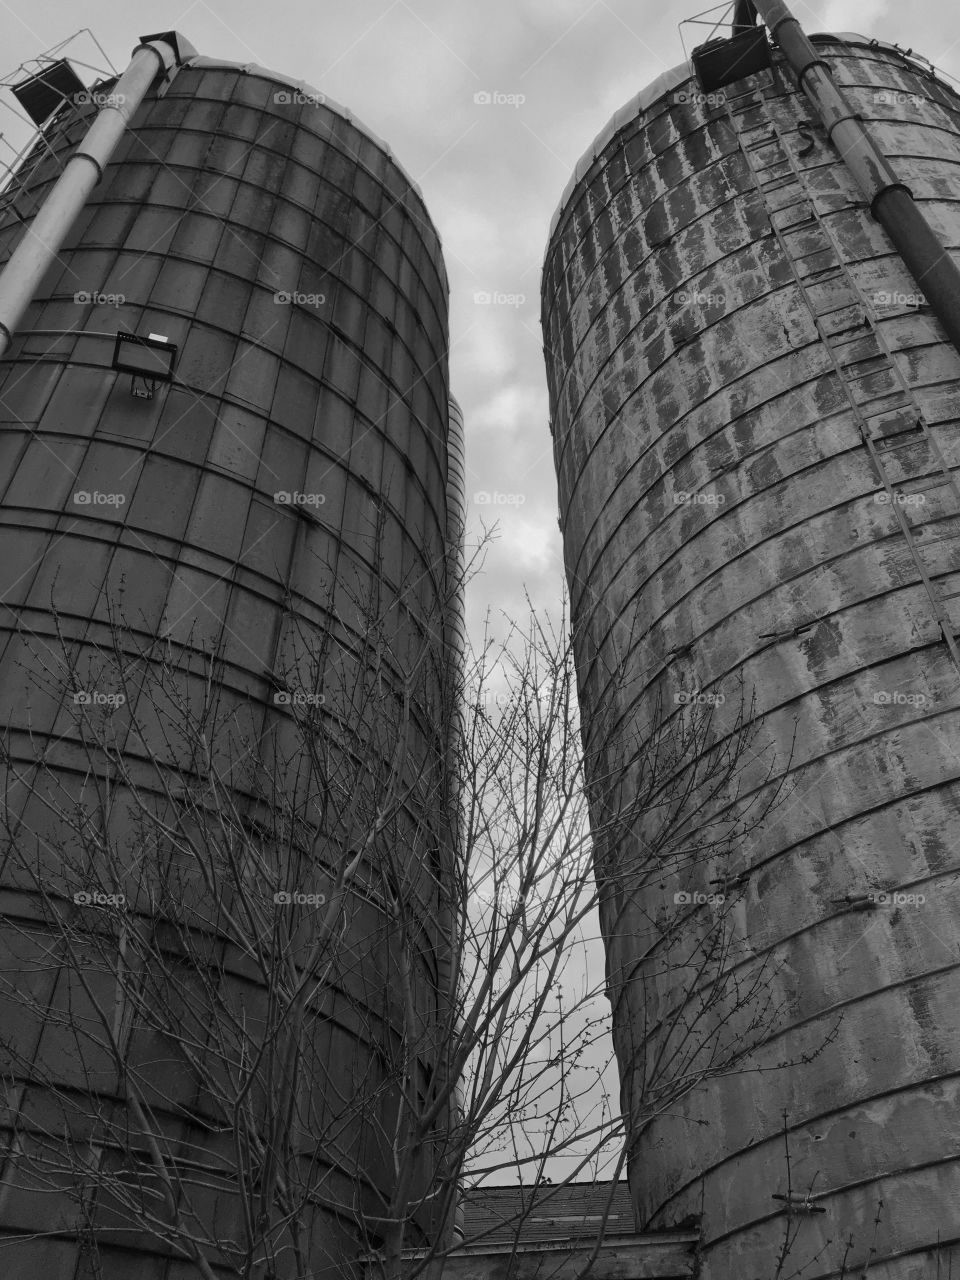 Cool twin silo.... empty & lonely 